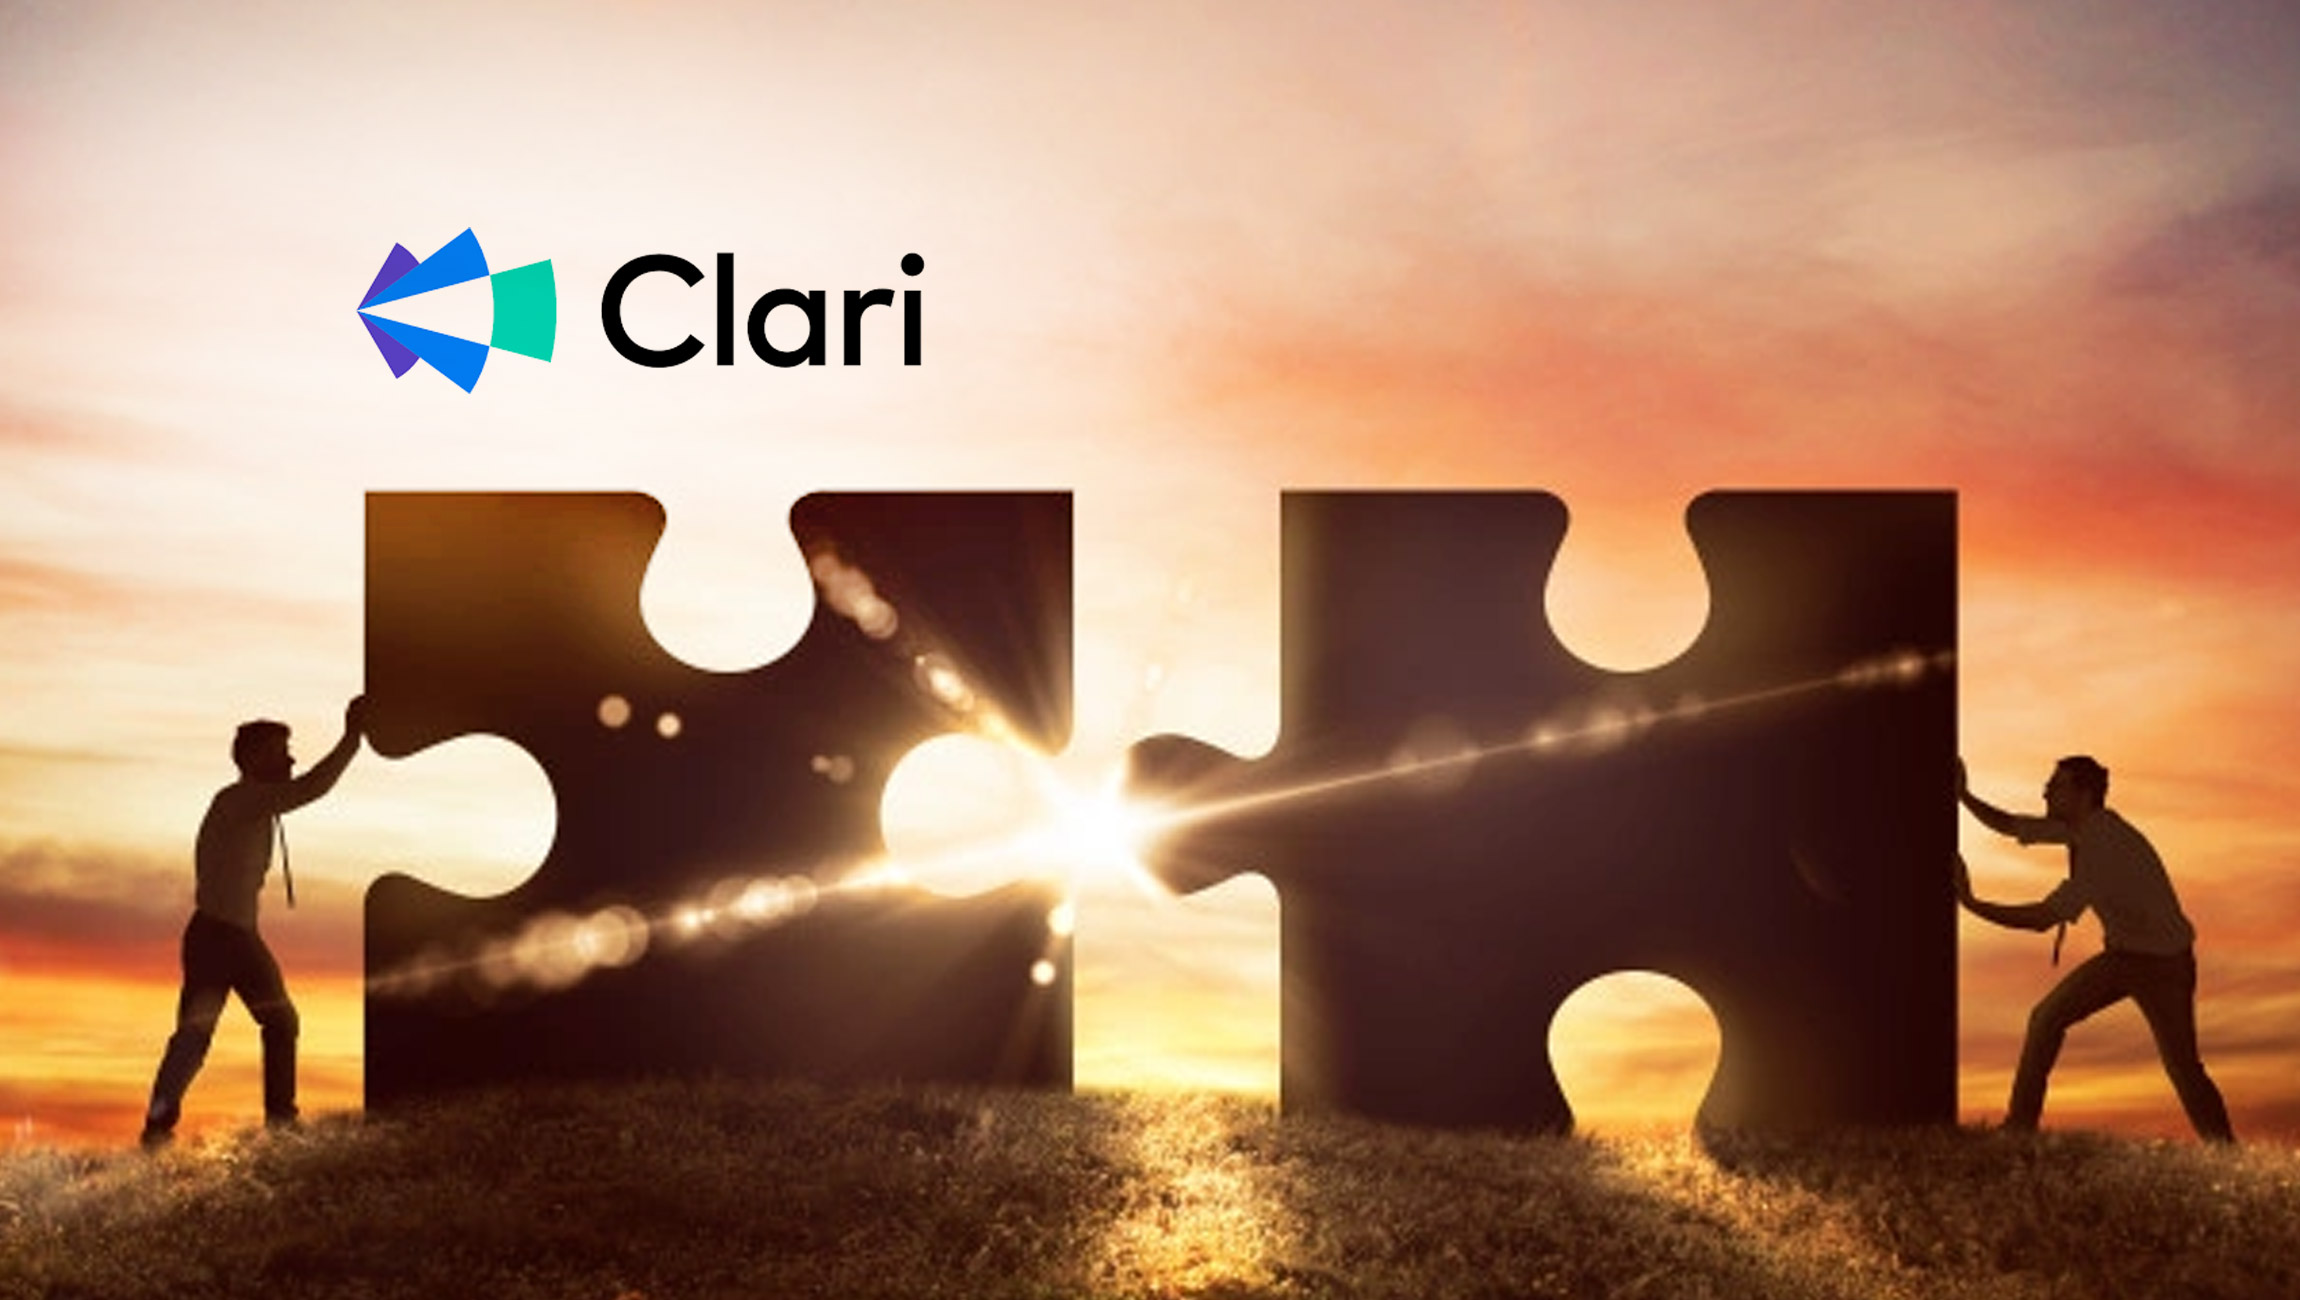 Clari-Announces-Acquisition-and-New-Features-to-Help-Sales-Teams-Win-More-Deals